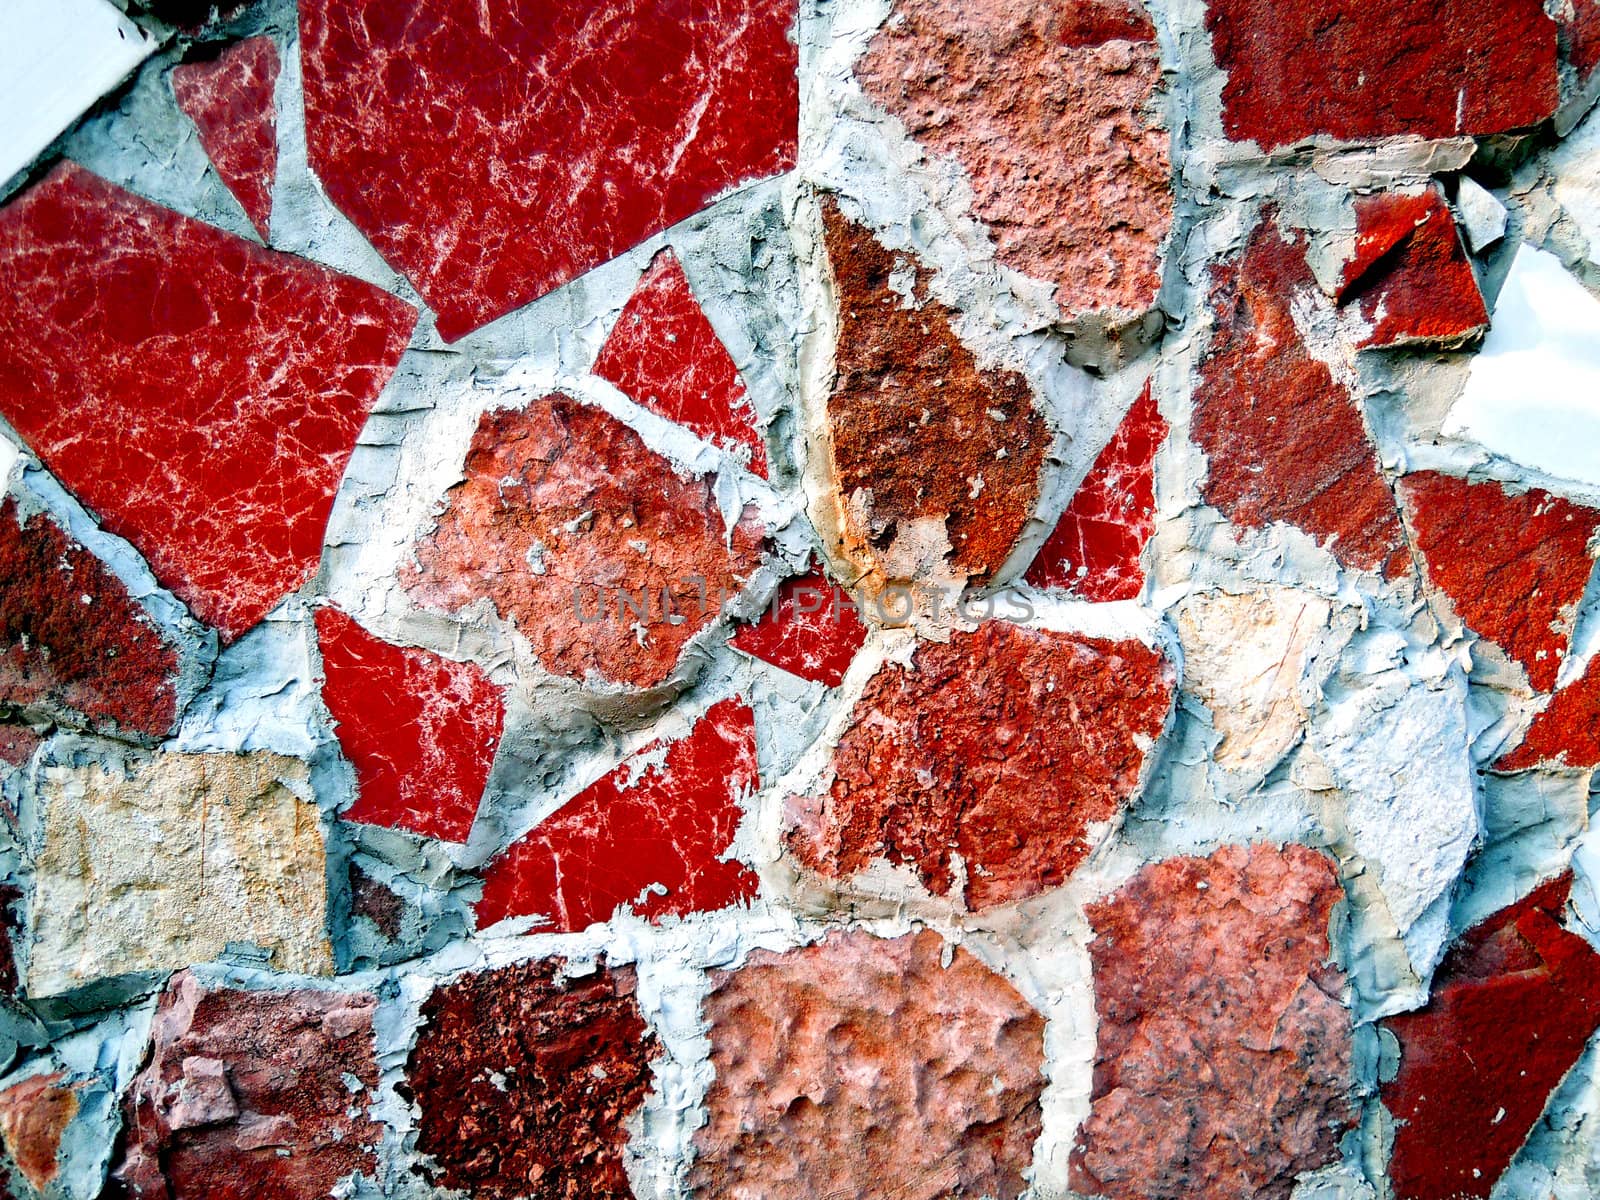  Red Tiles and stone background by MalyDesigner